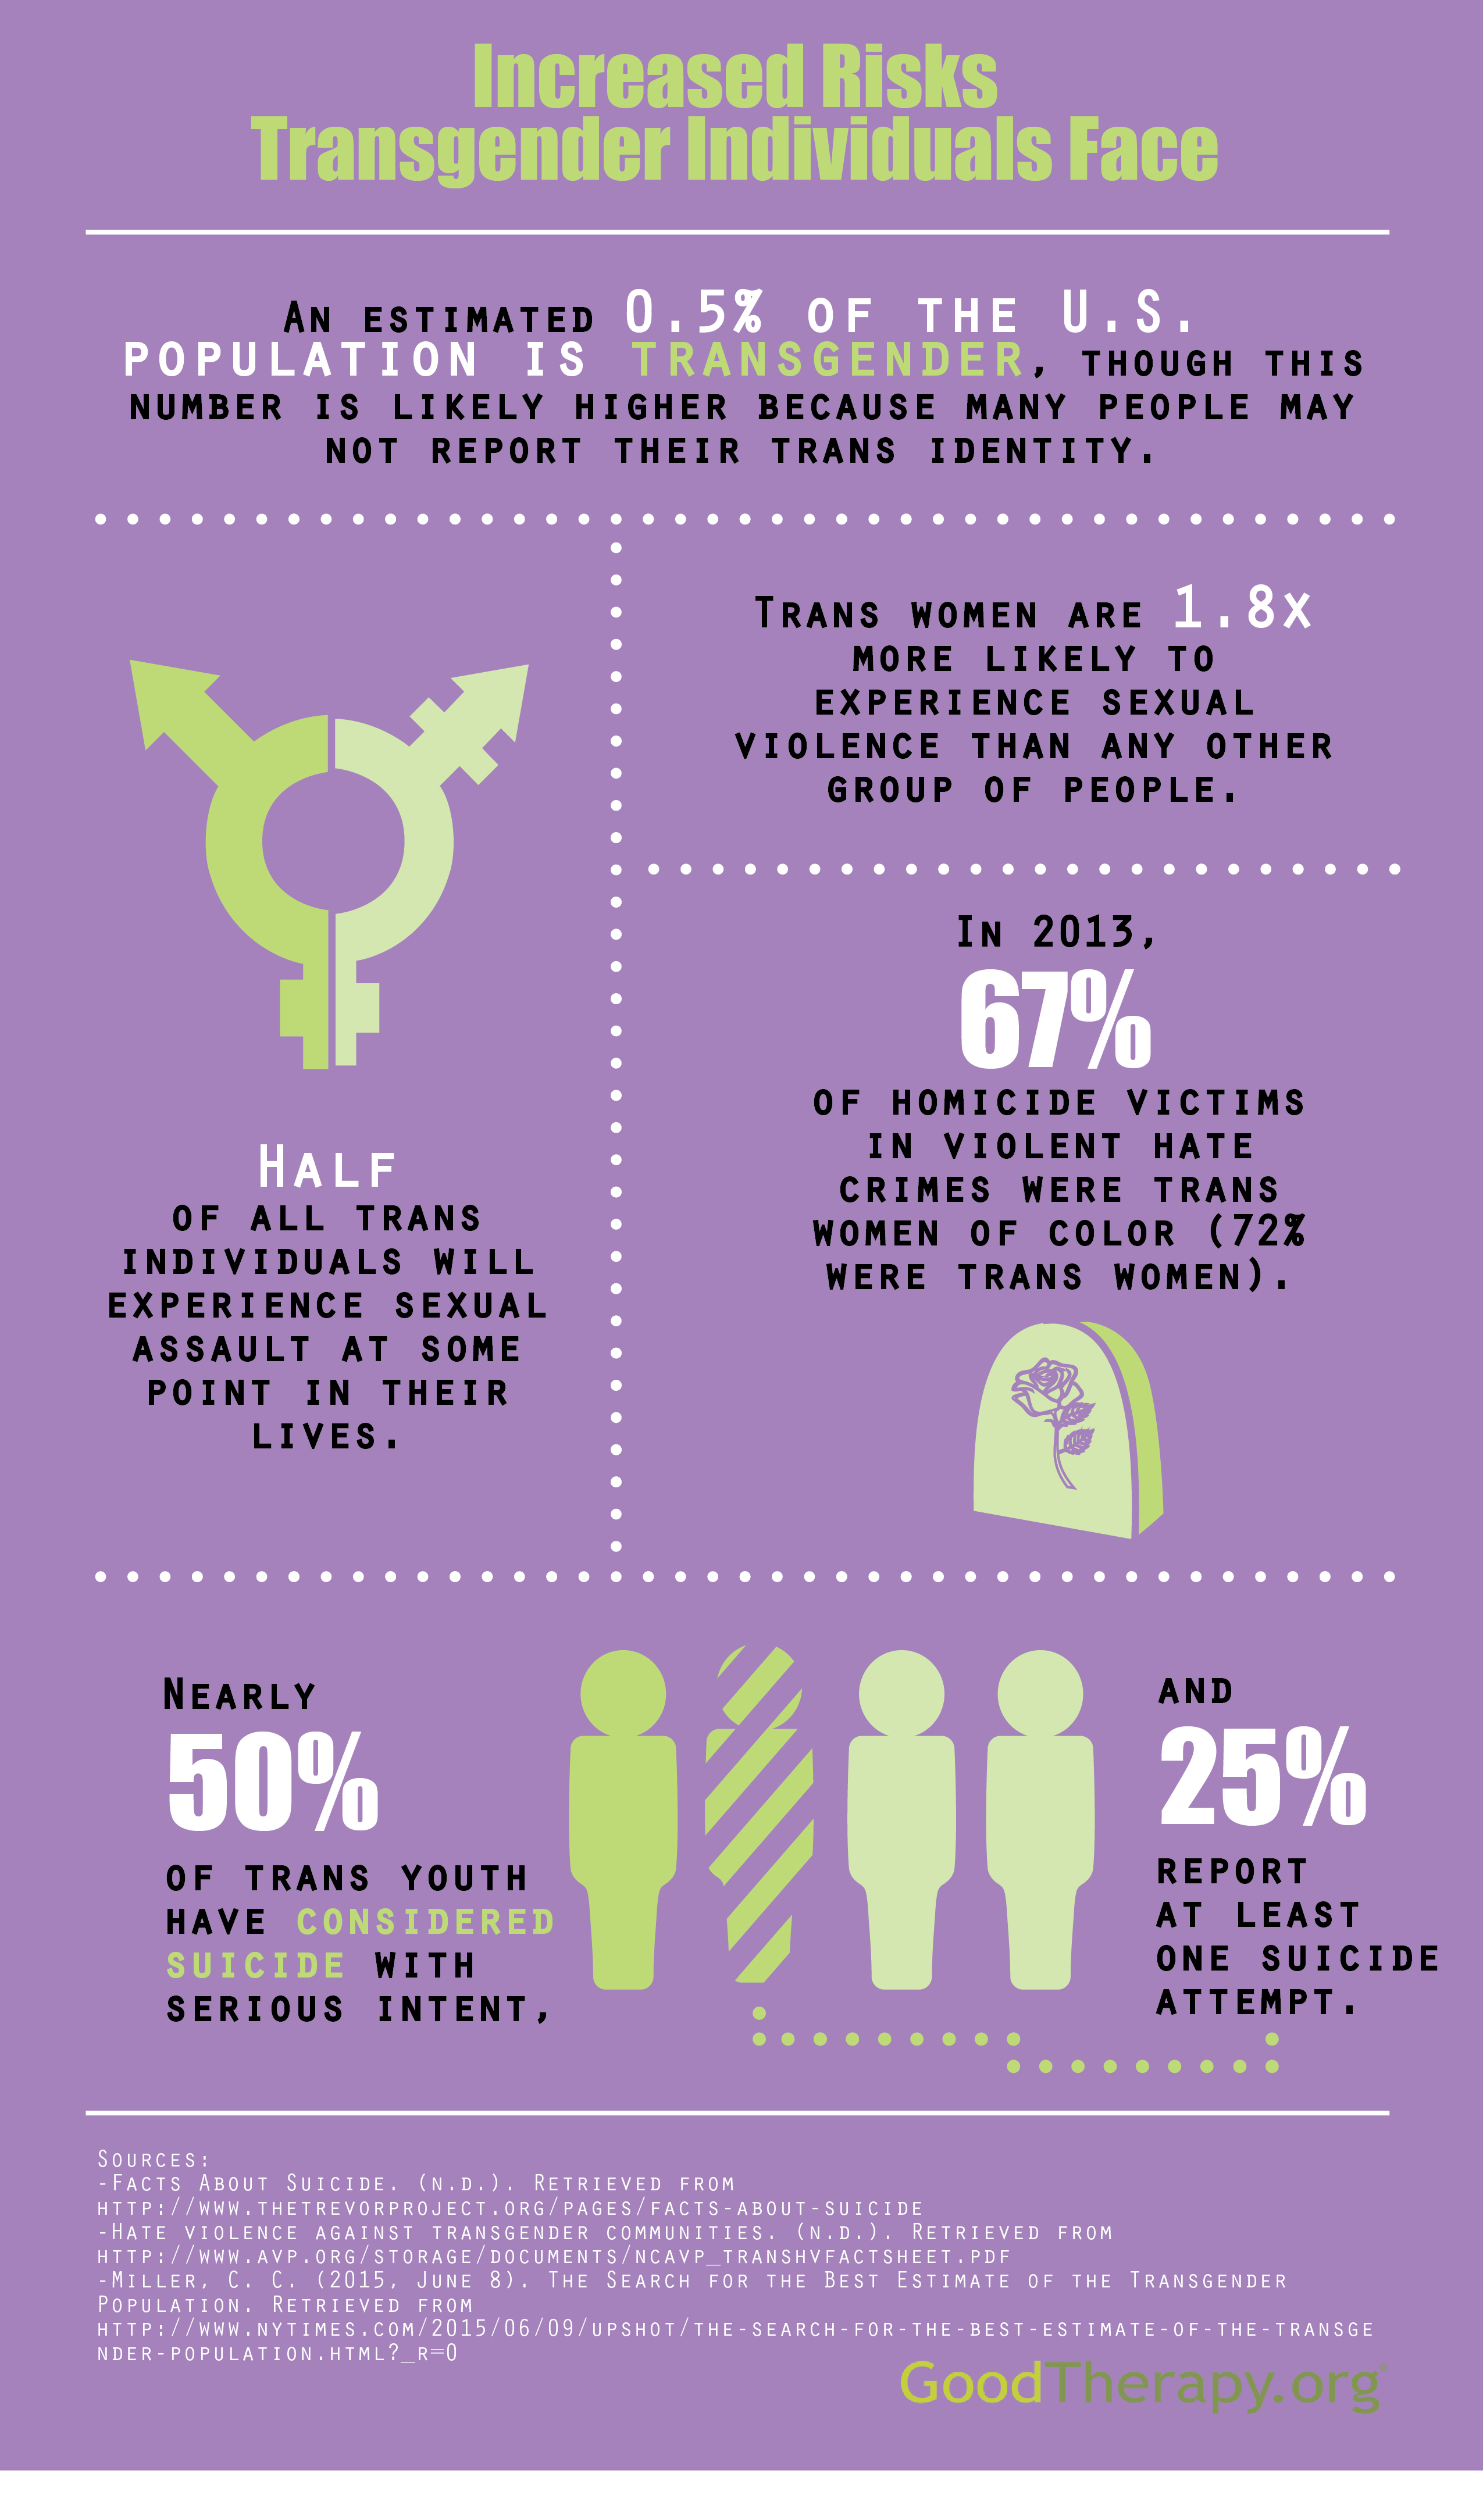 Infographic by GoodTherapy.org that illustrates assault risks that transgender individuals face